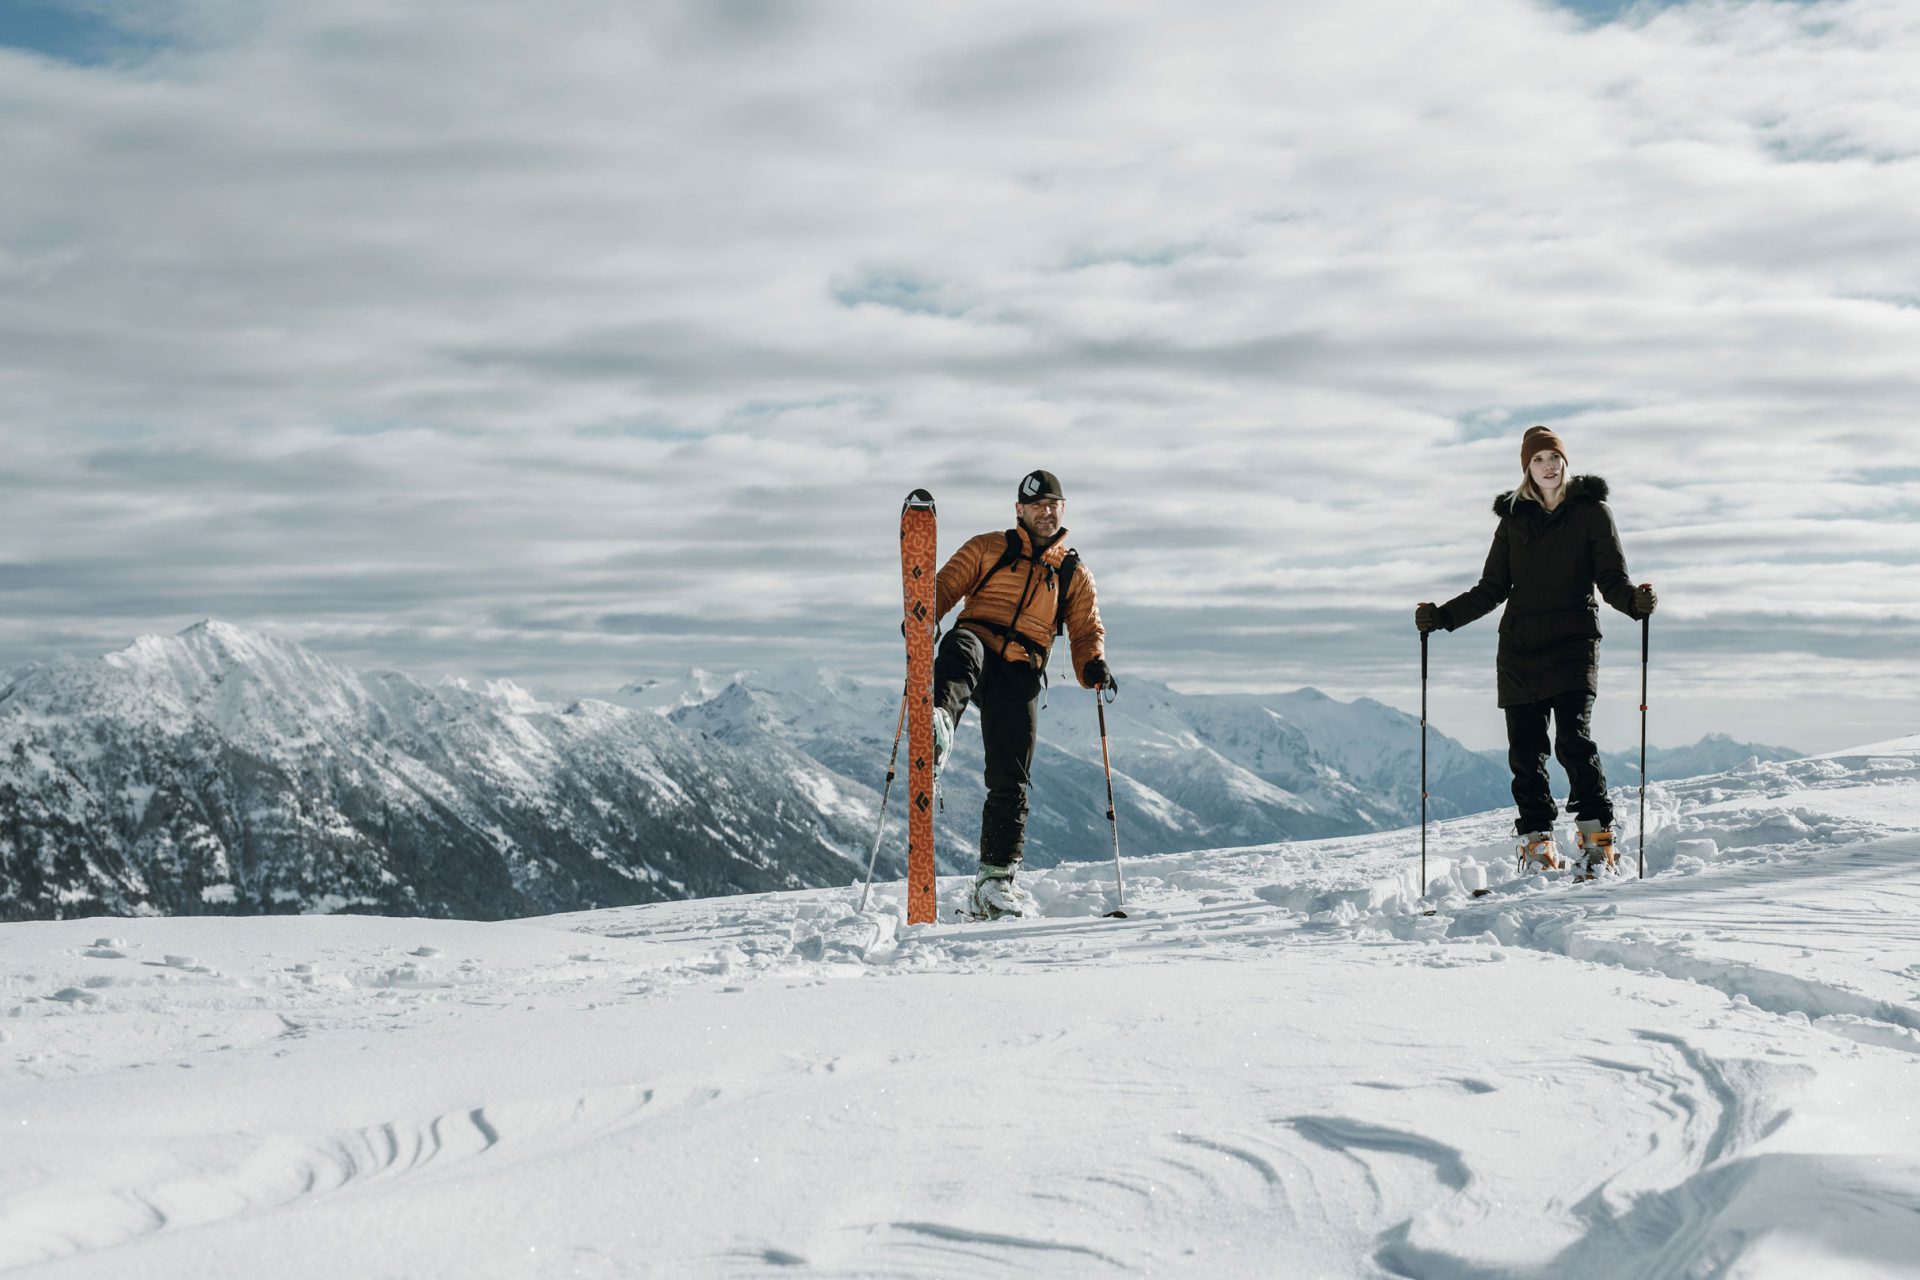 Two people skiing with the Cascade mountains in the background